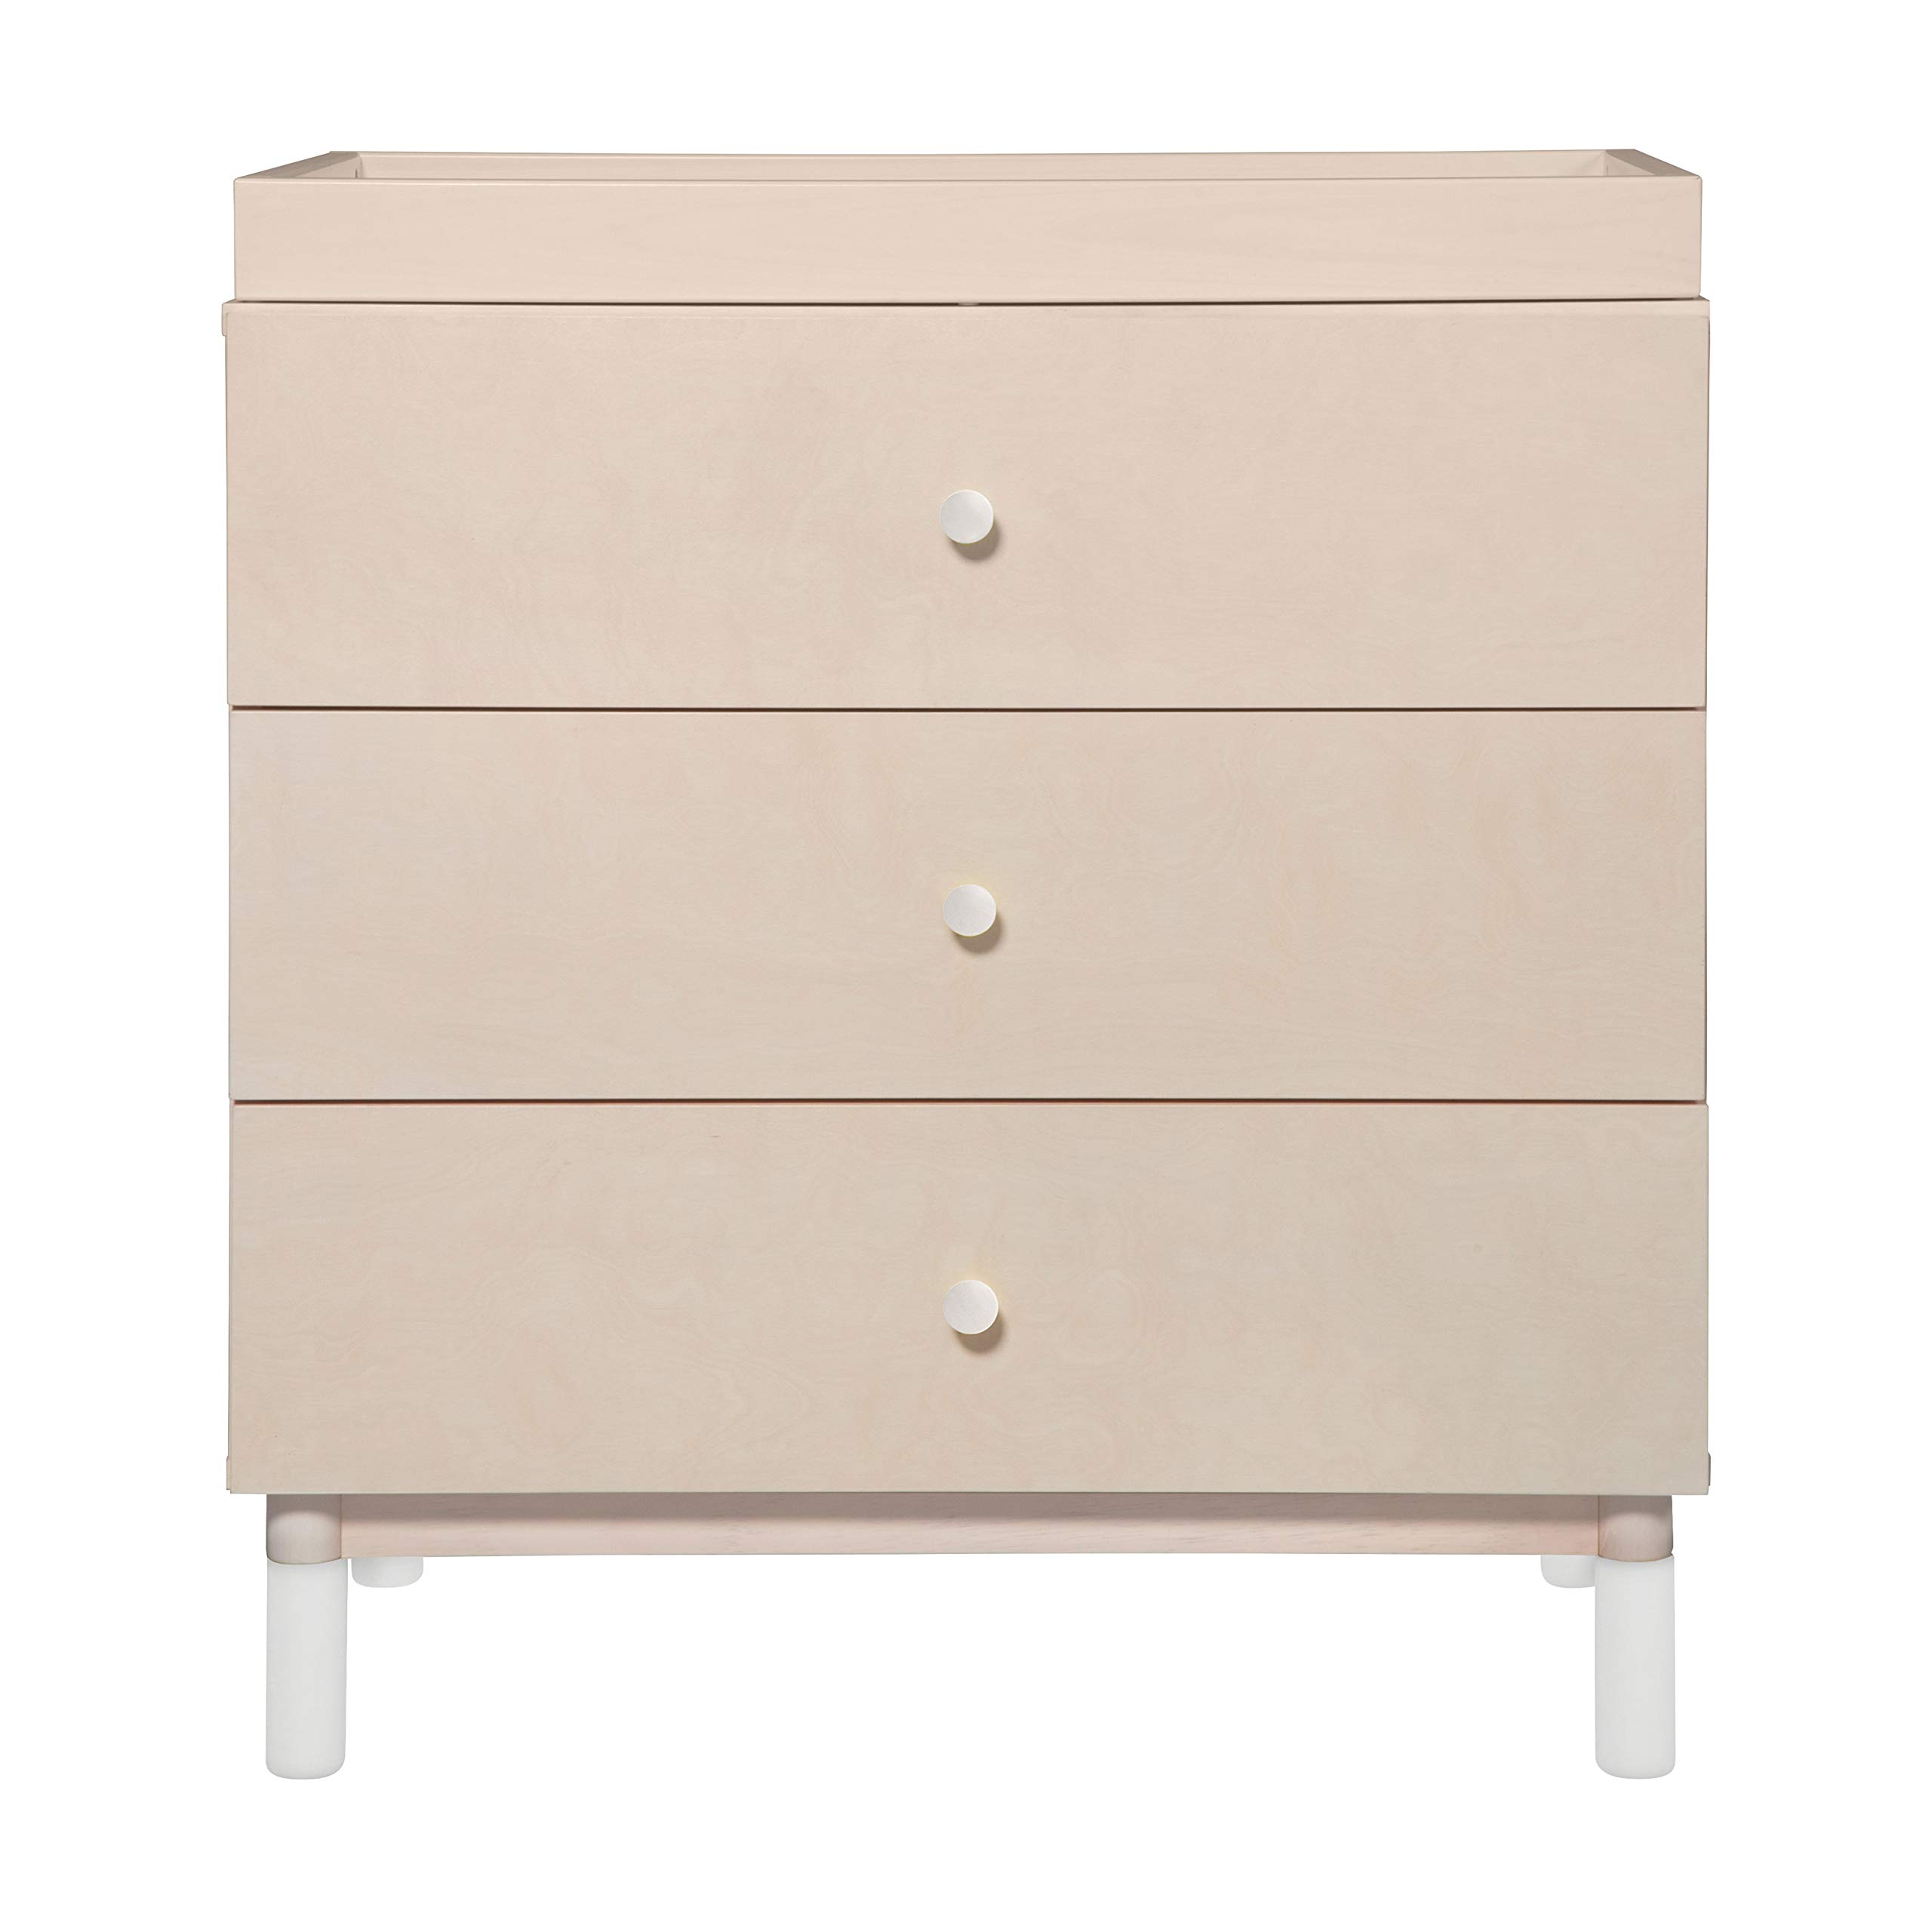 Babyletto Gelato 3-Drawer Changer Dresser with Removable Changing Tray in Washed Natural and White, Greenguard Gold Certified